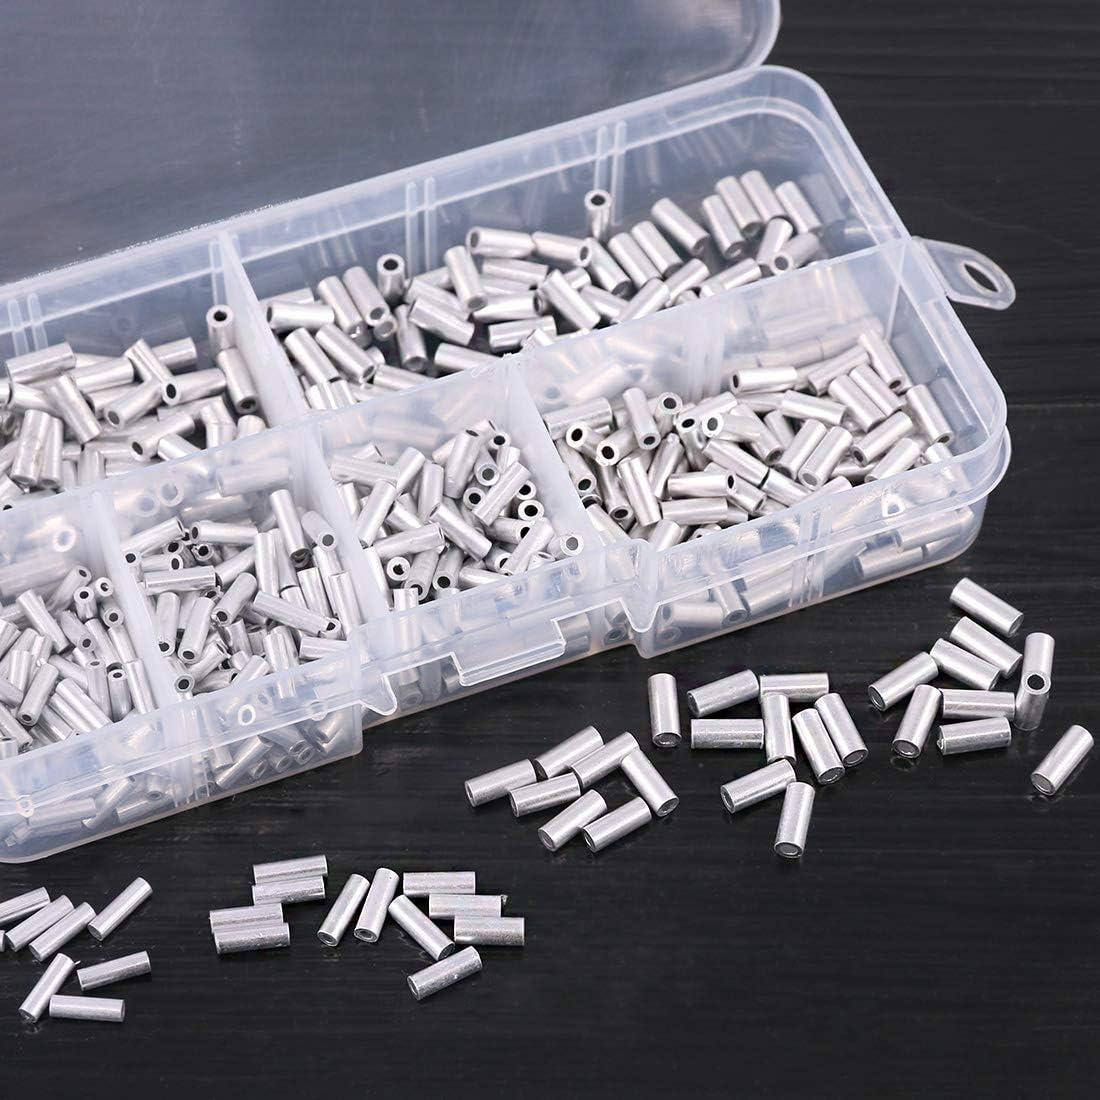 Hilitchi 600 Pcs 6 Sizes Single Barrel Crimp Sleeves Mini Aluminum Crimp  Sleeves Connector Kit for Fishing Line for 1.0, 1.2, 1.4, 1.6, 1.8, & 2mm  Fishing Wire Dia.